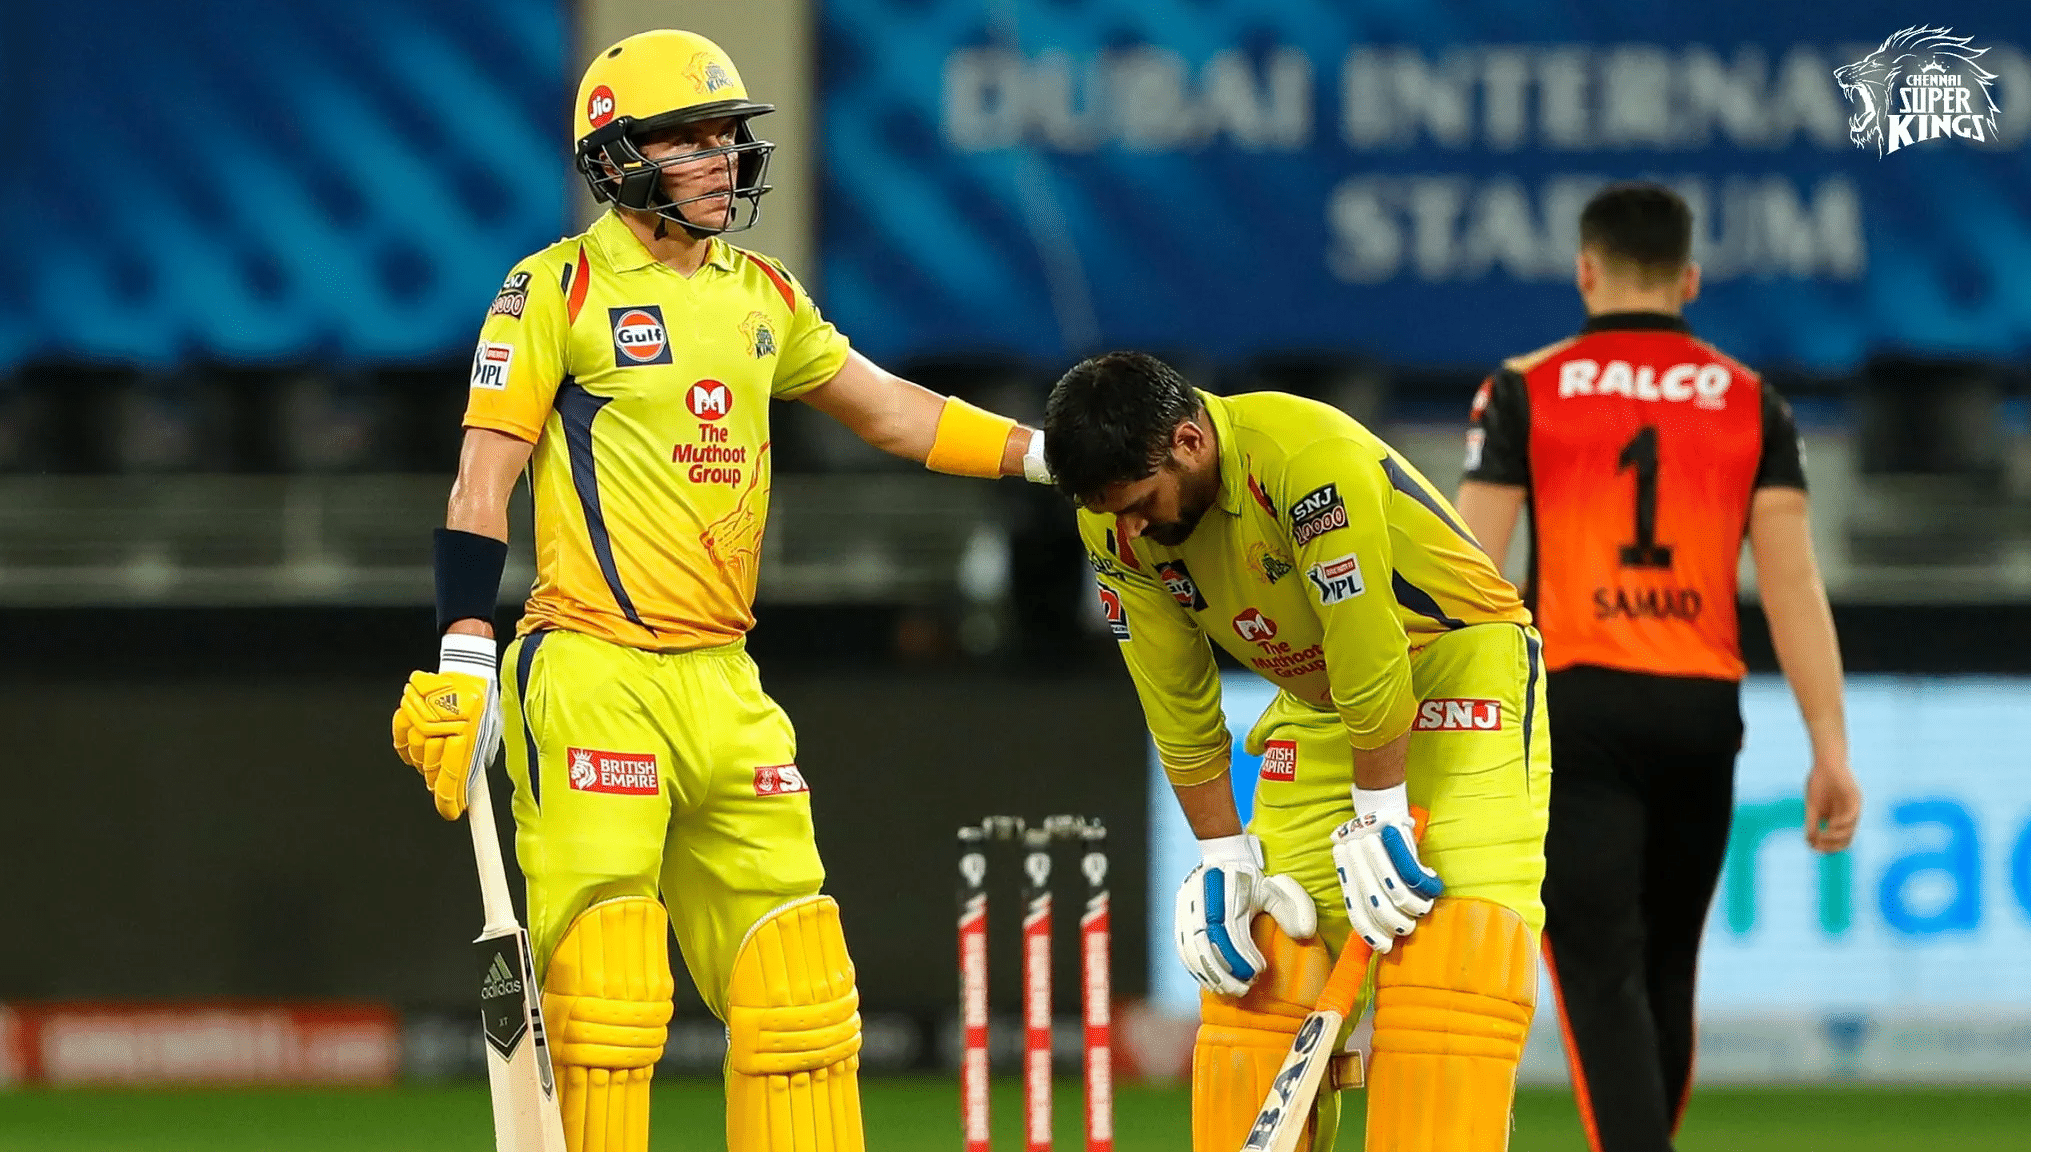 ‘Bat wants an old Dhoni’: Twitterati reacts to CSK skipper’s ‘slow innings’ against SRH